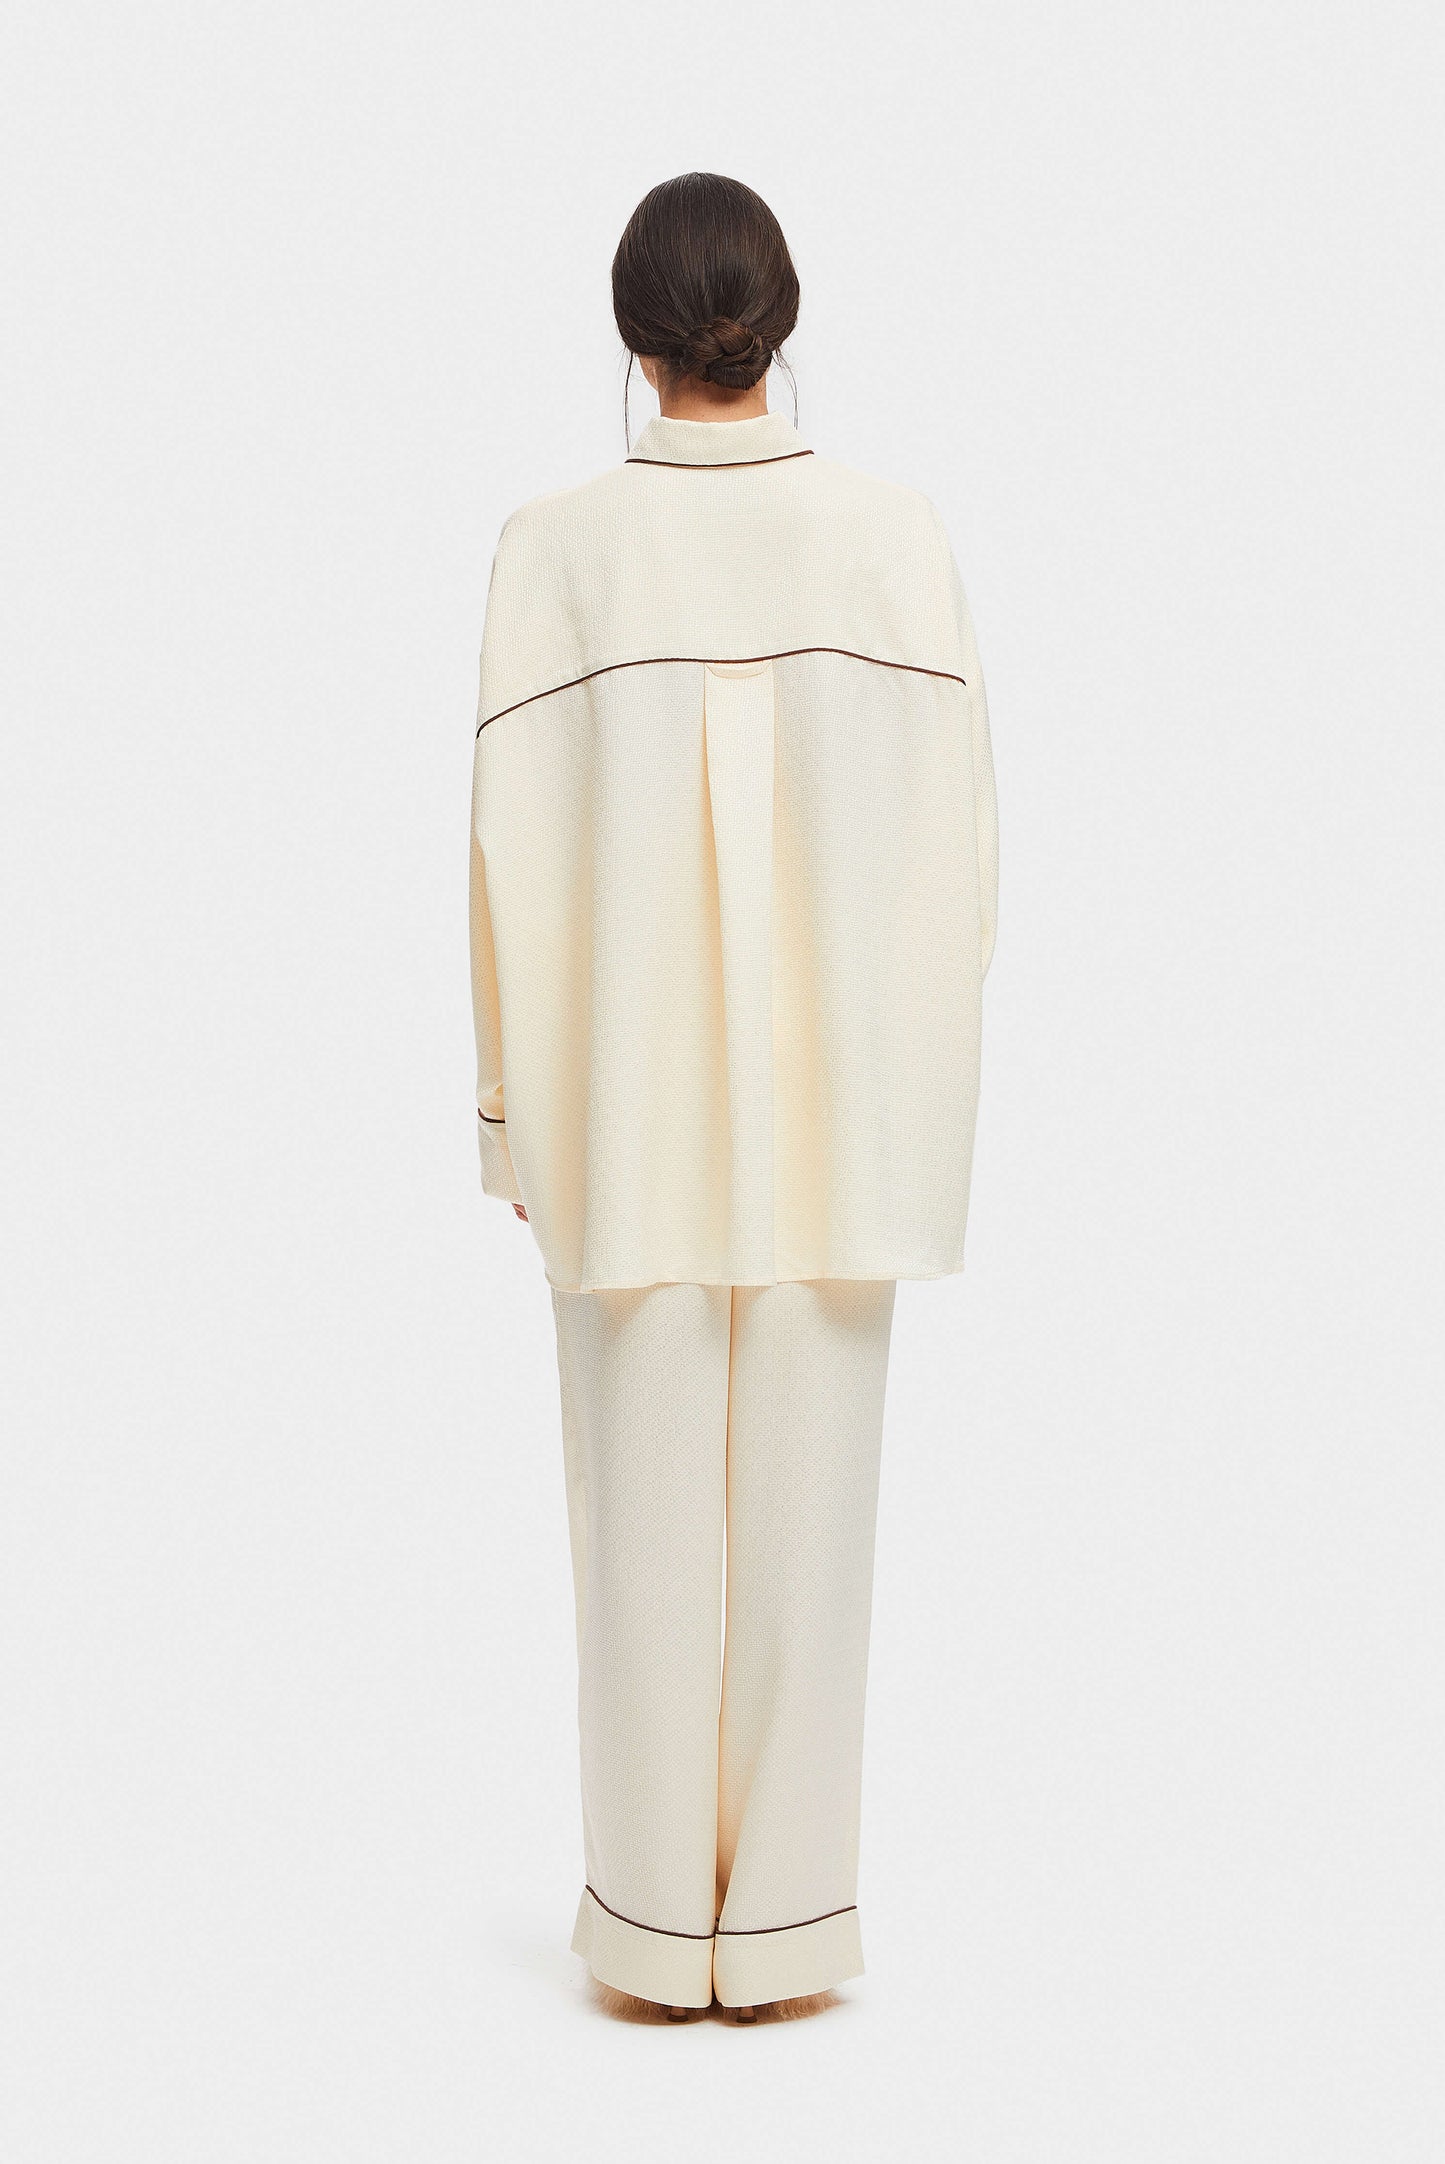 Pastelle Oversized Jacquard Shirt in Pearl